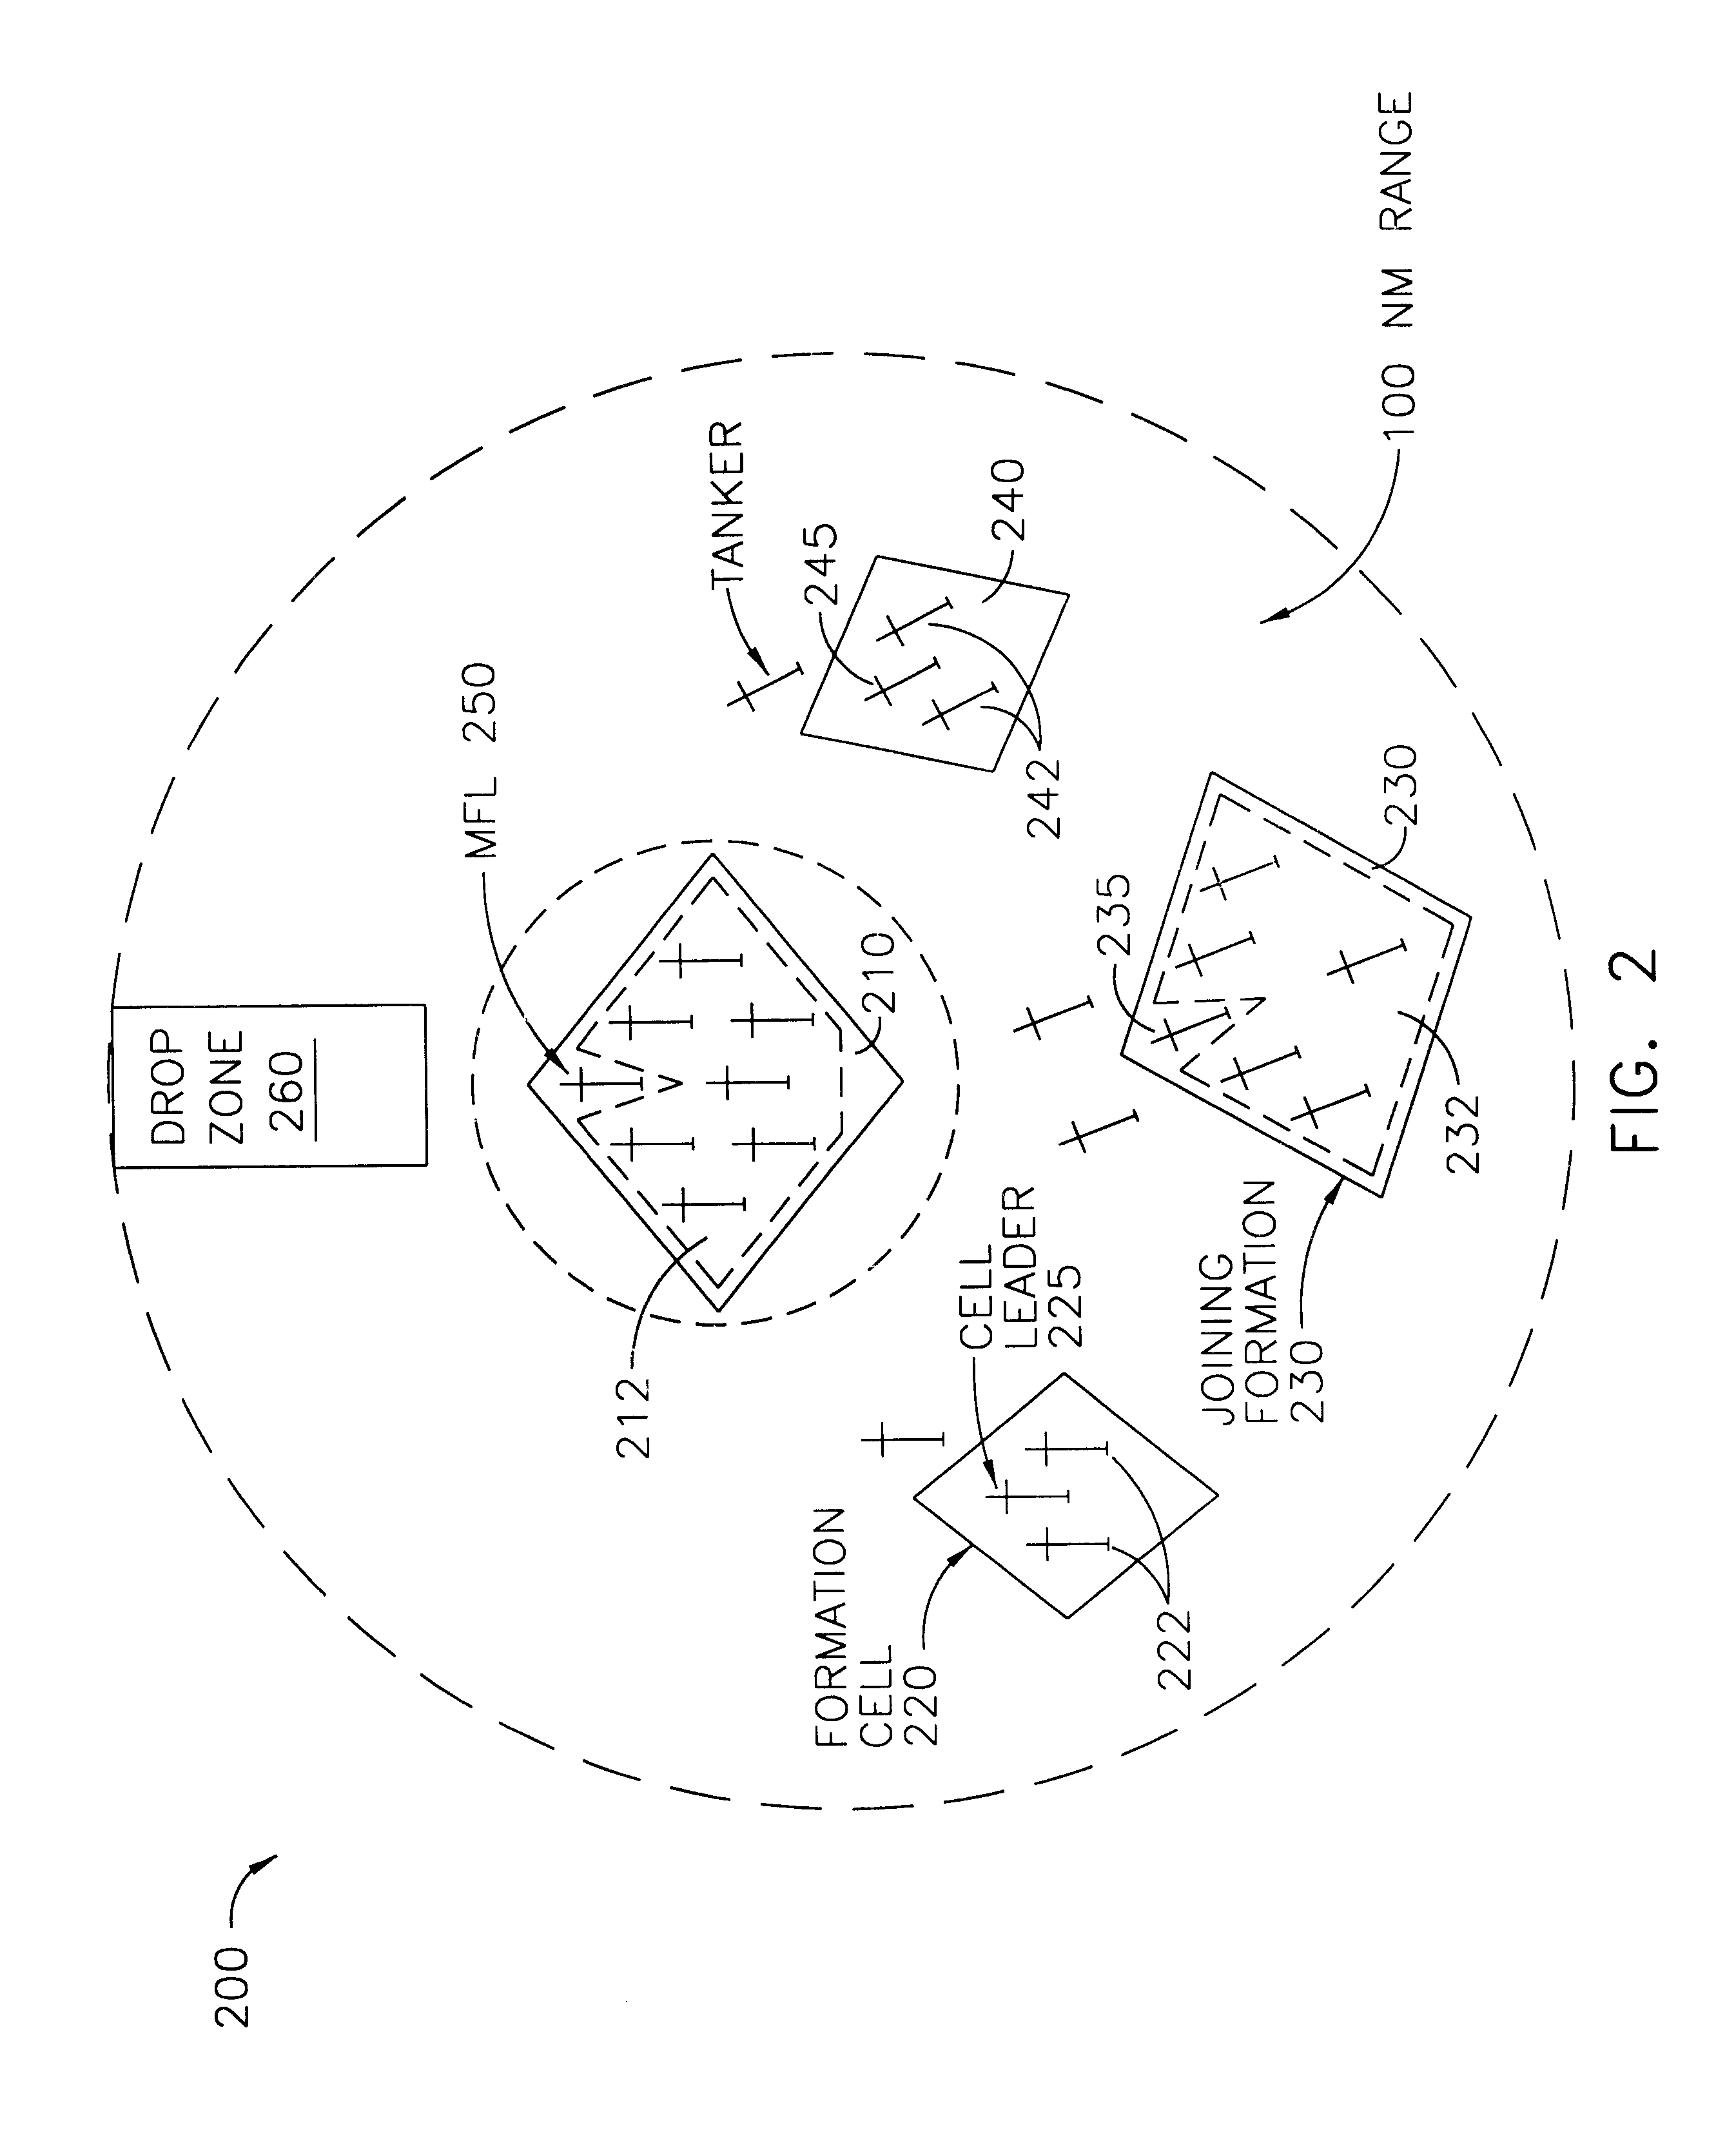 Close/intra-formation positioning collision avoidance system and method